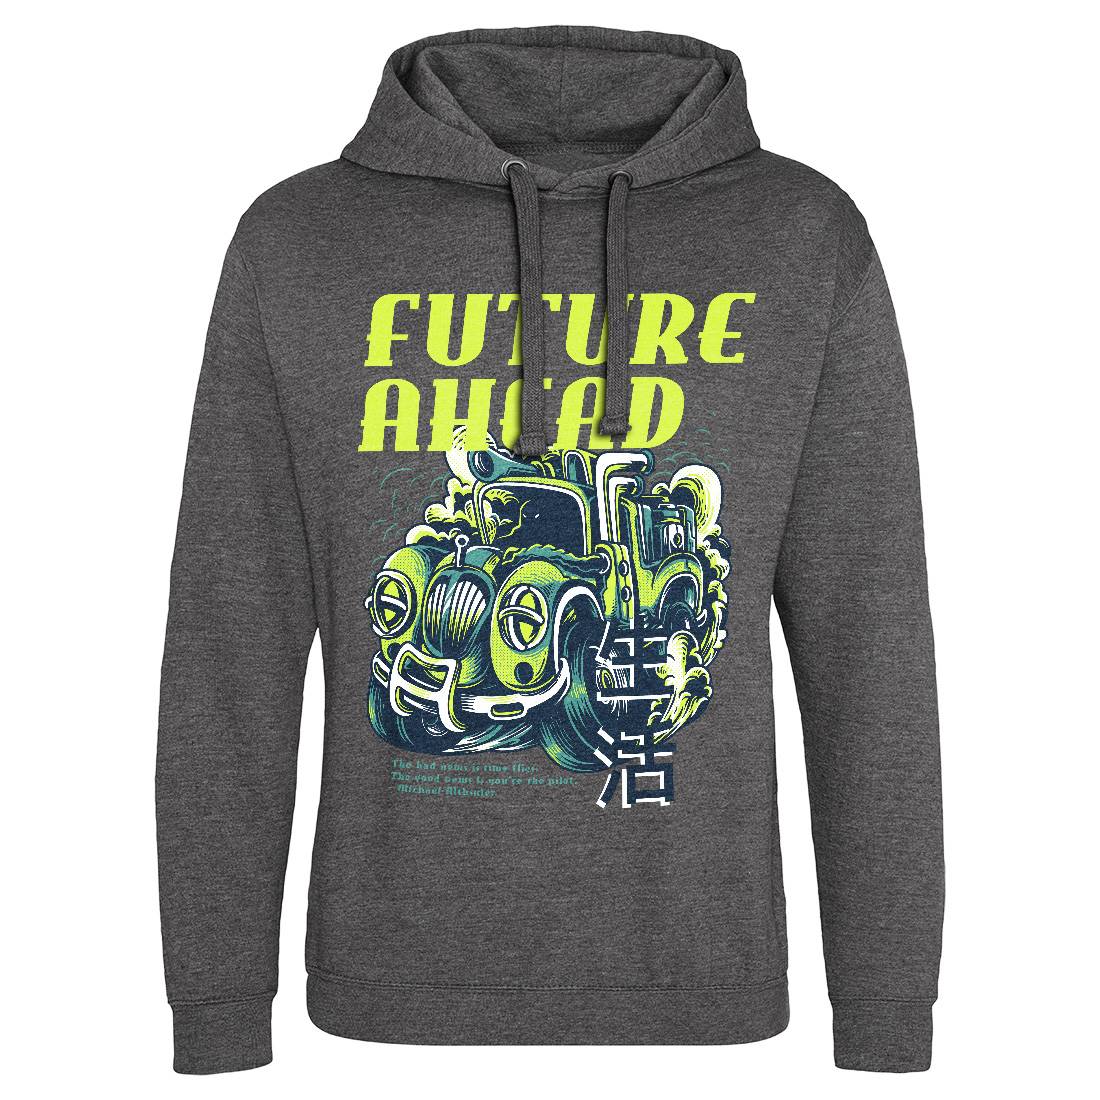 Future Ahead Mens Hoodie Without Pocket Cars D787